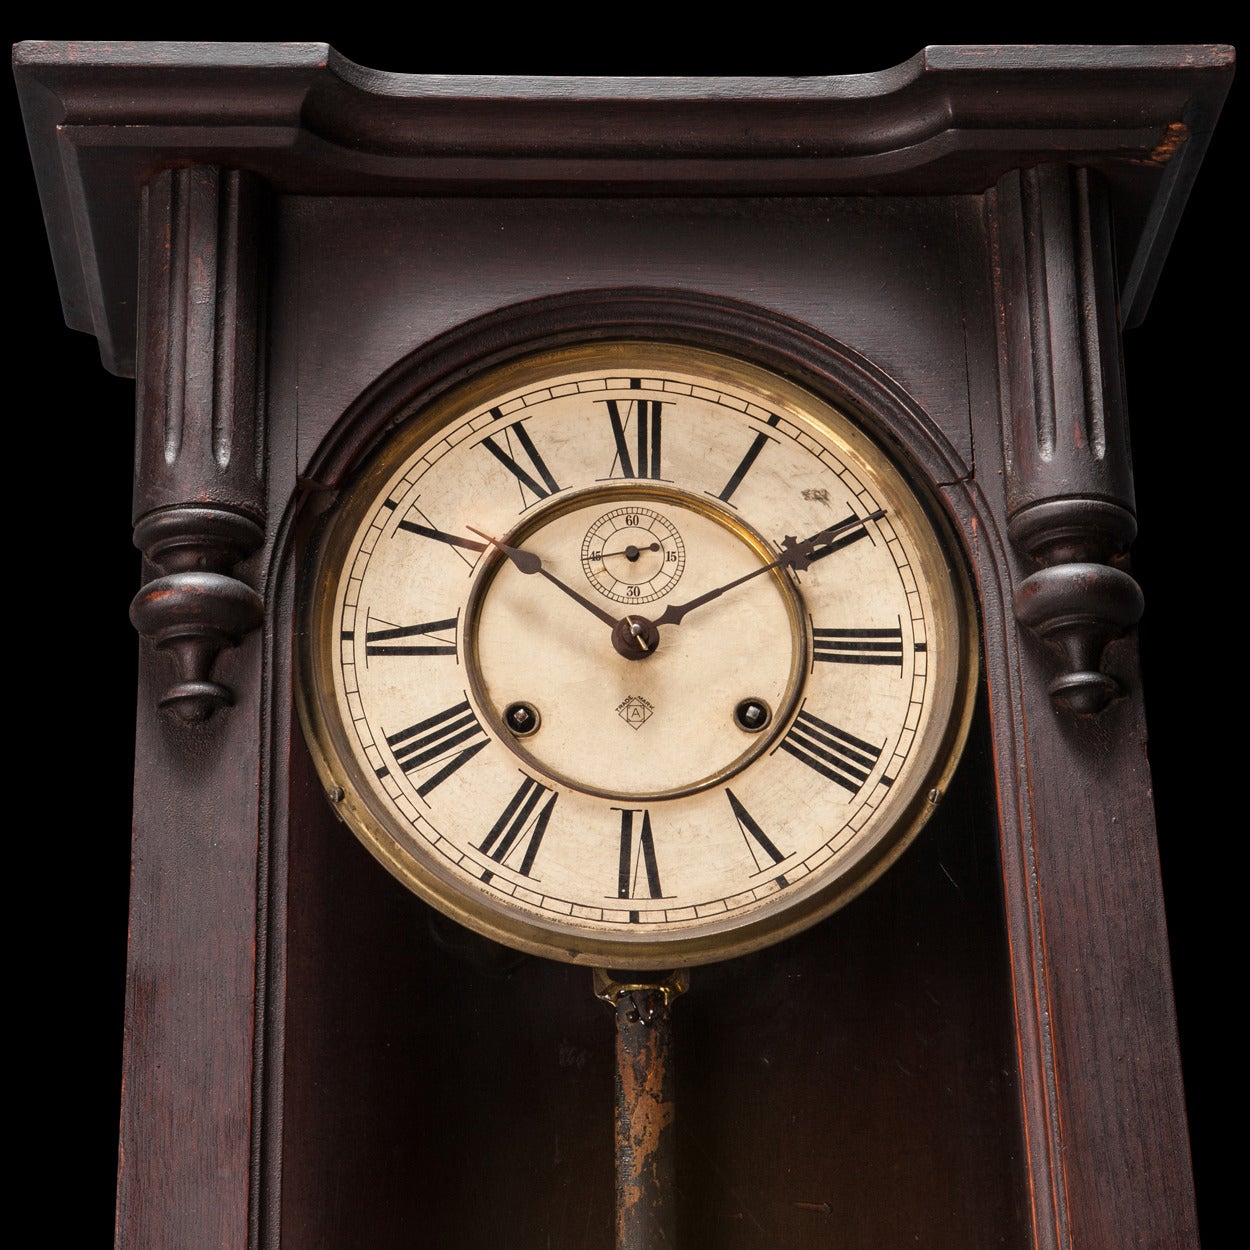 Pendulum clock in original walnut frame, with and painted face.

Manufactured by the Ansonia Clock Company in Brooklyn, NY circa 1900.